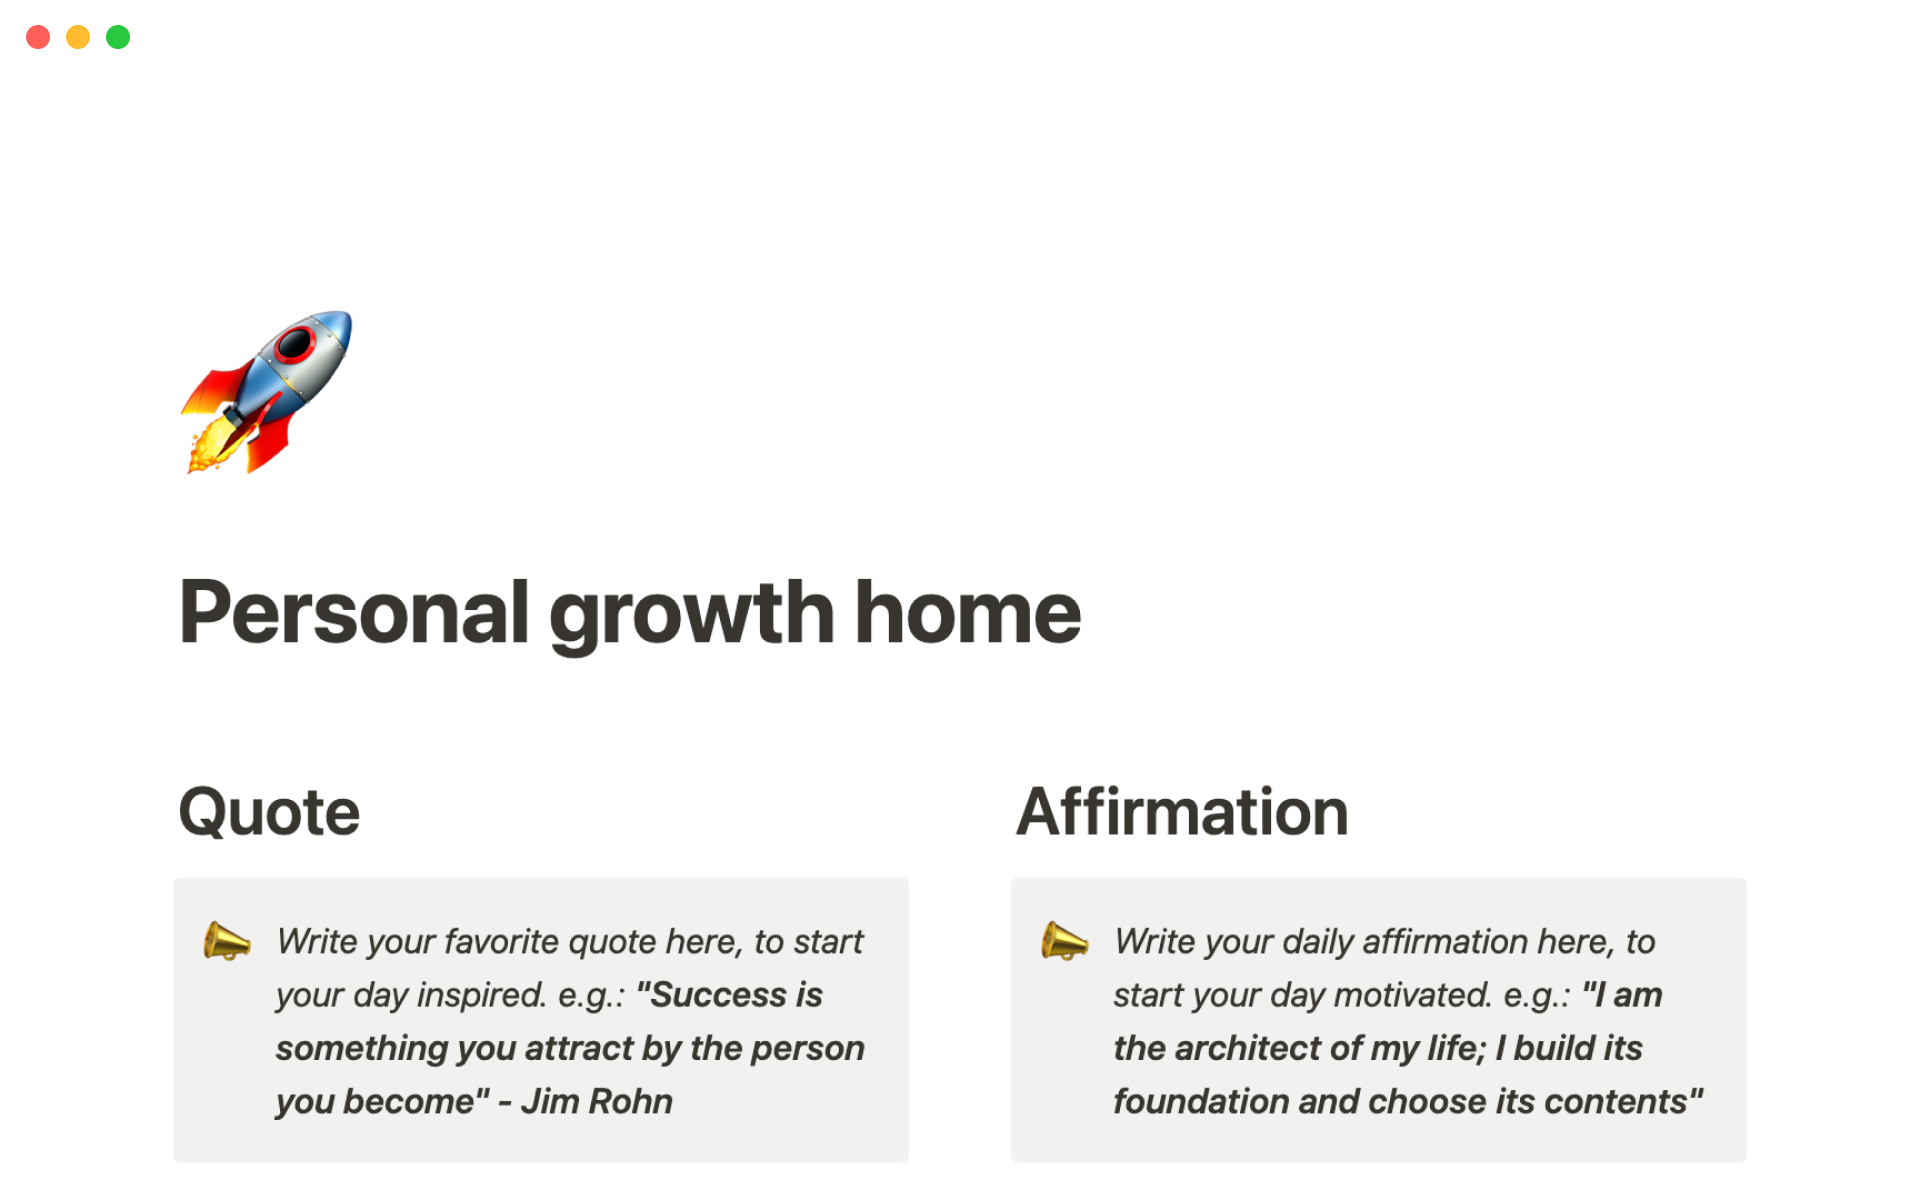 Create your own digital personal growth home page in Notion.